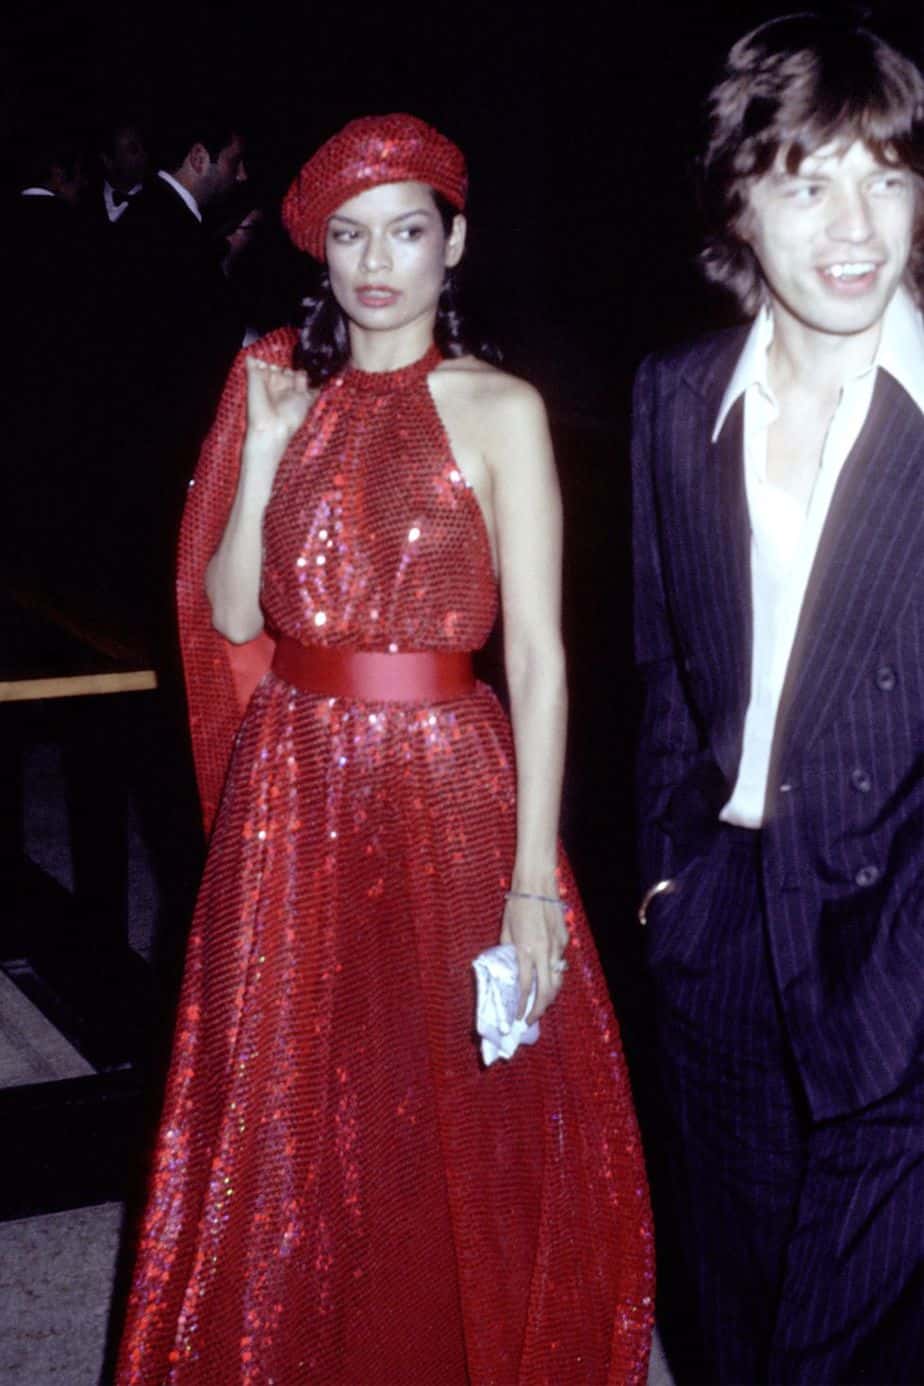 Bianca Jagger's 1974 Met Gala dress has stood the test of time (source: University of Fashion)